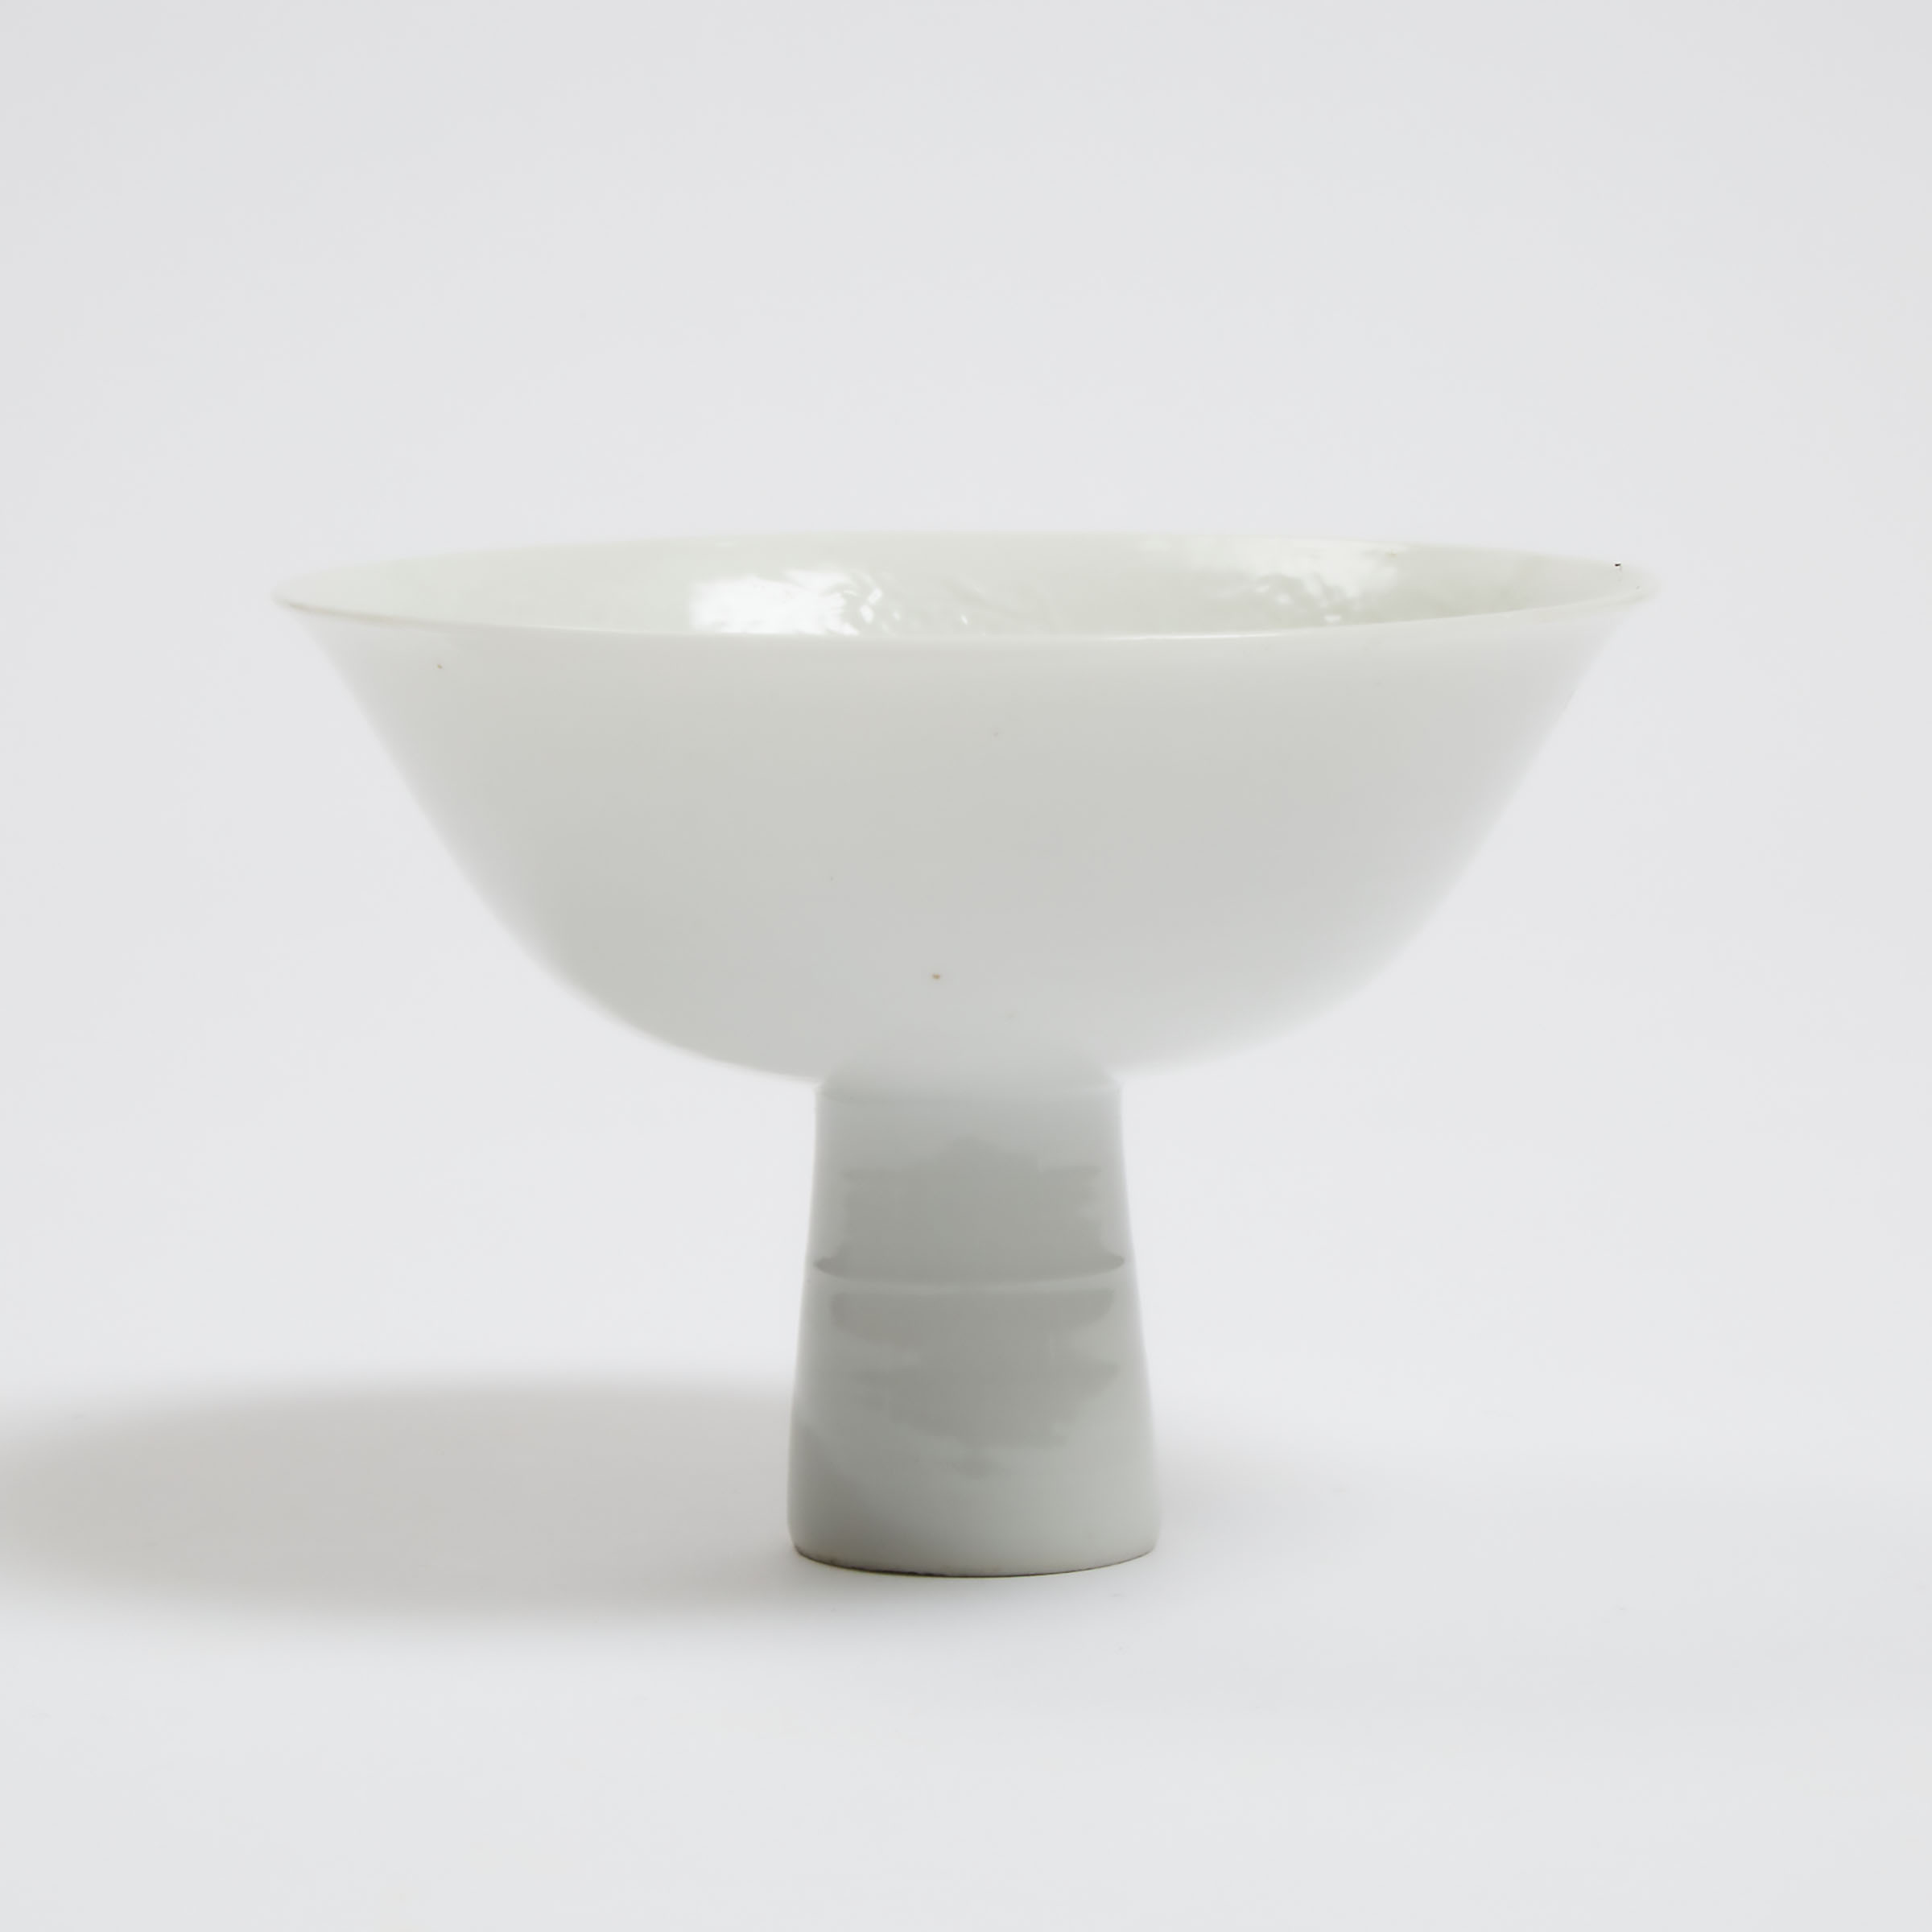 An Anhua-Decorated White-Glazed